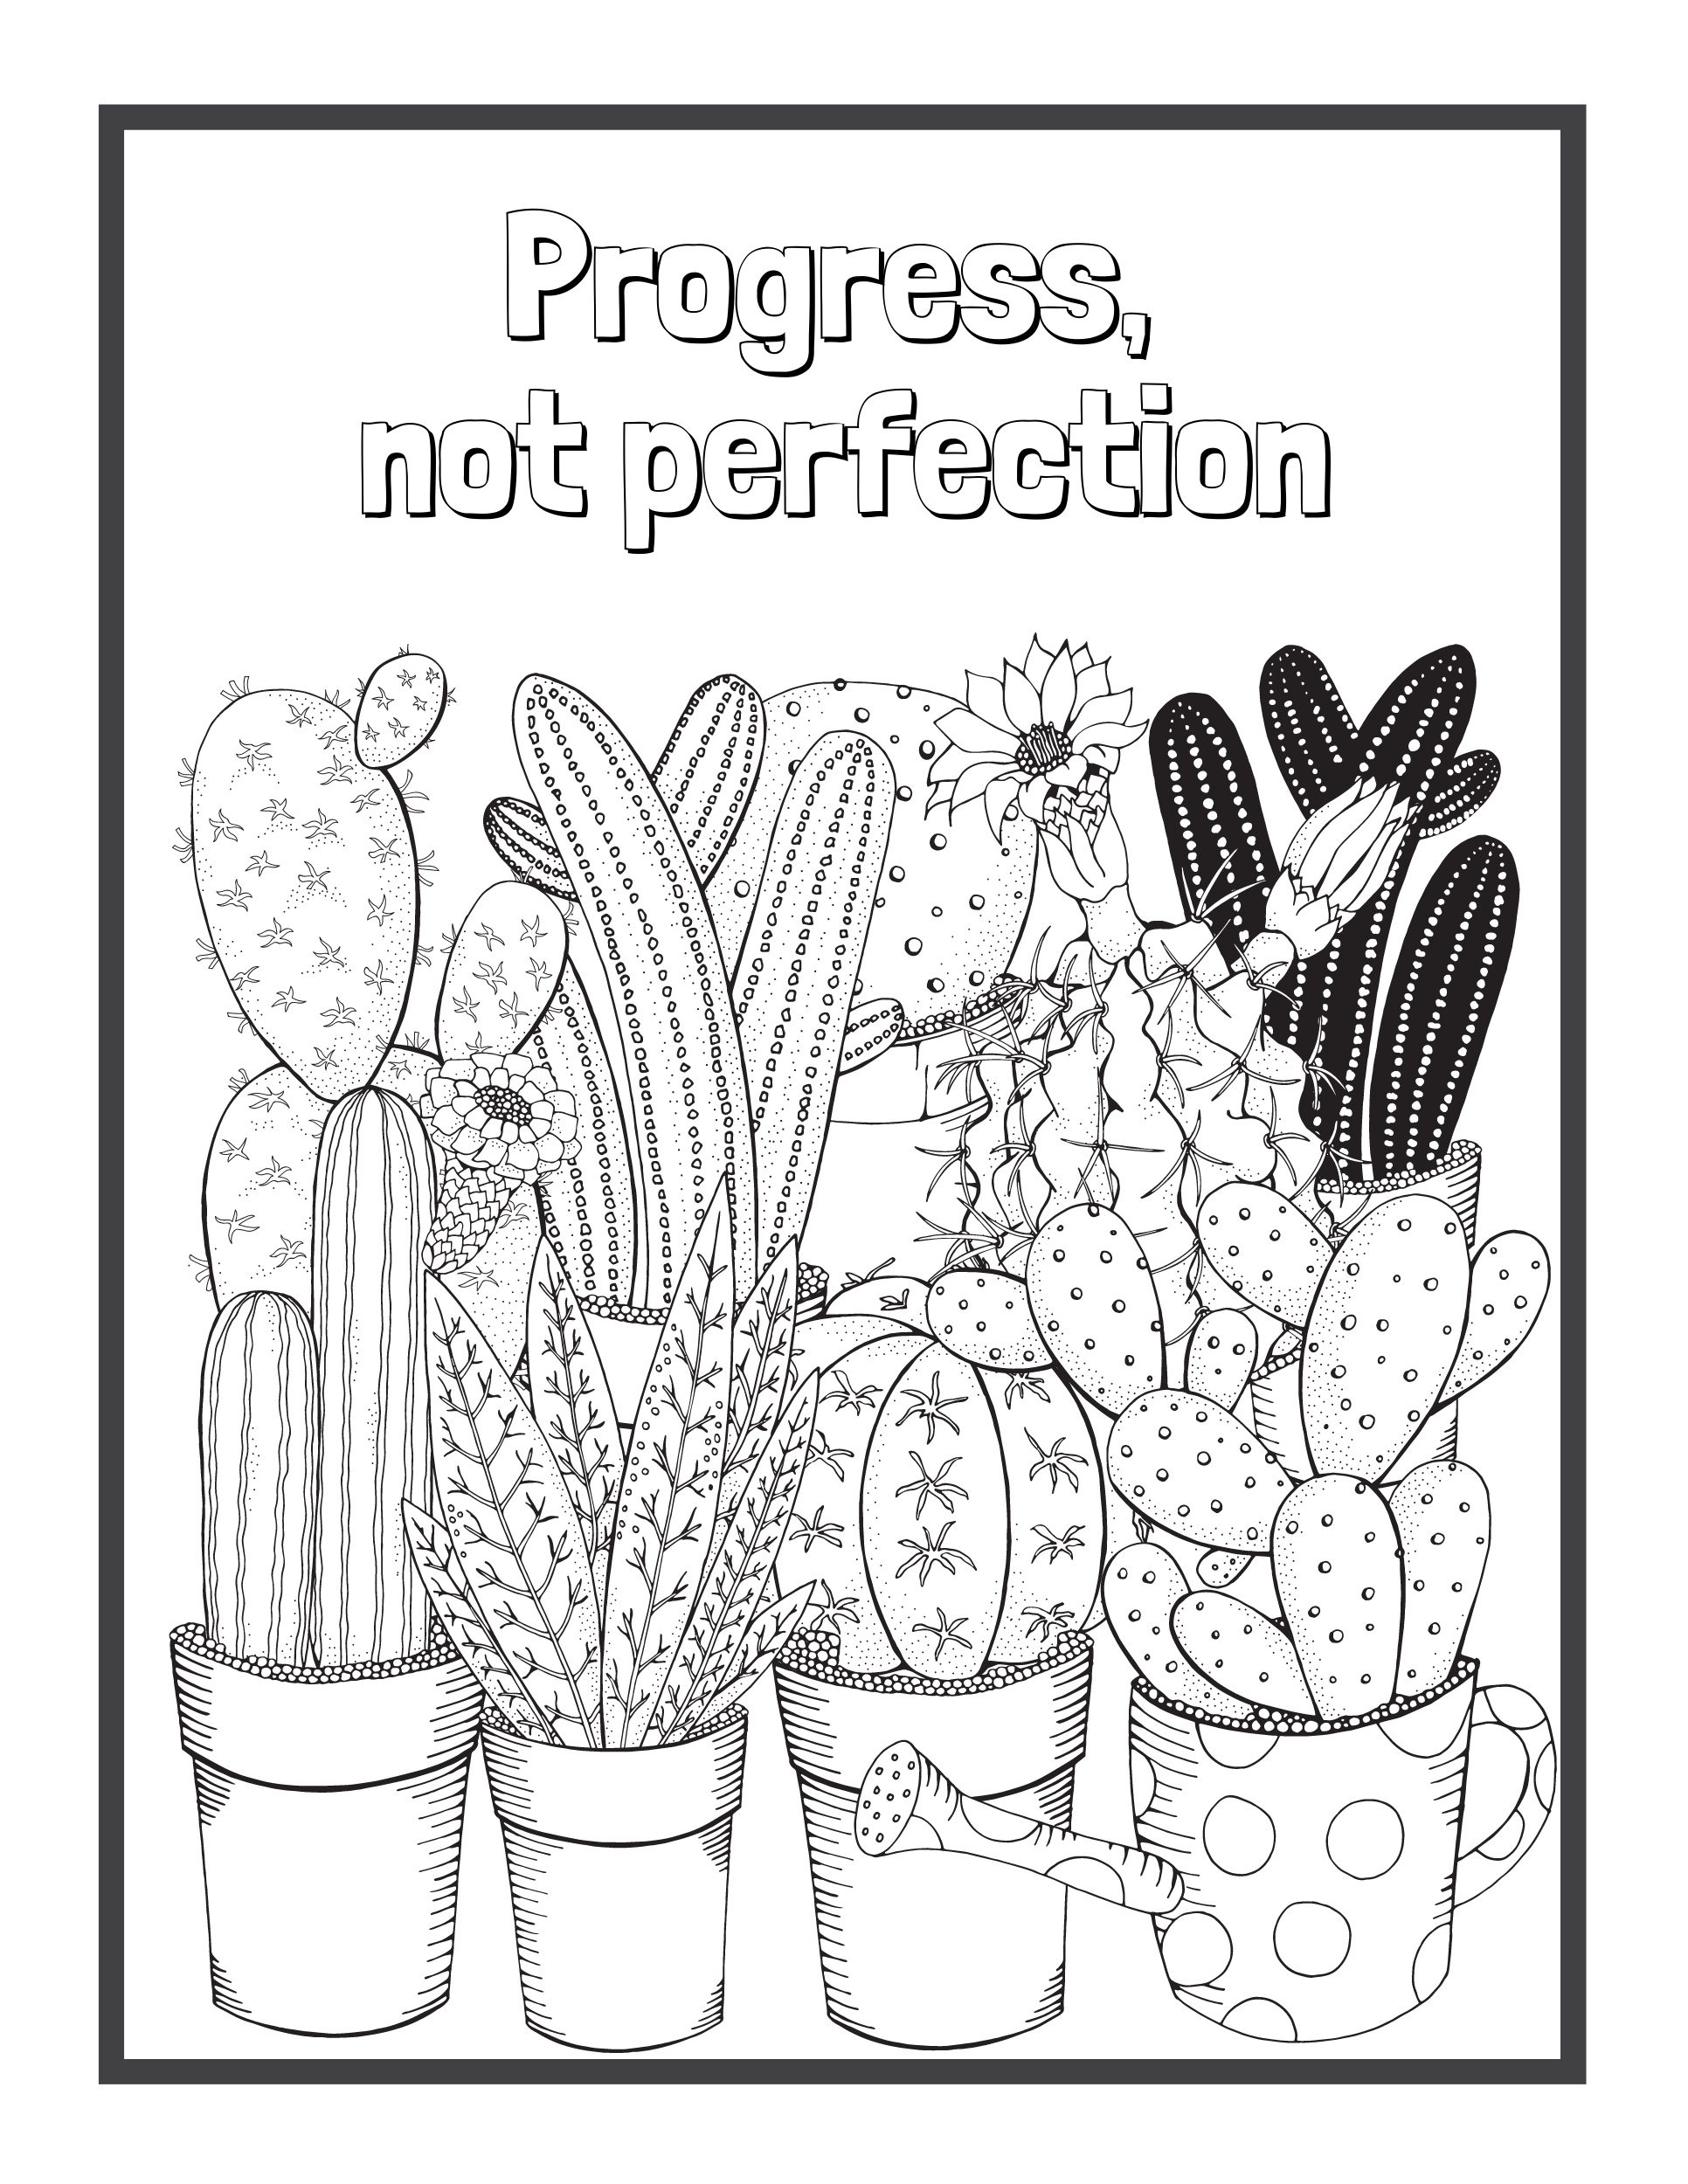 Fuck This I'm Coloring: Motivational Swear Words Coloring Book: Swear Word Colouring Books for Adults: Swearing Colouring Book Pages for Stress Relief and Relaxation ... Adult Coloring Book Cuss Words [Book]